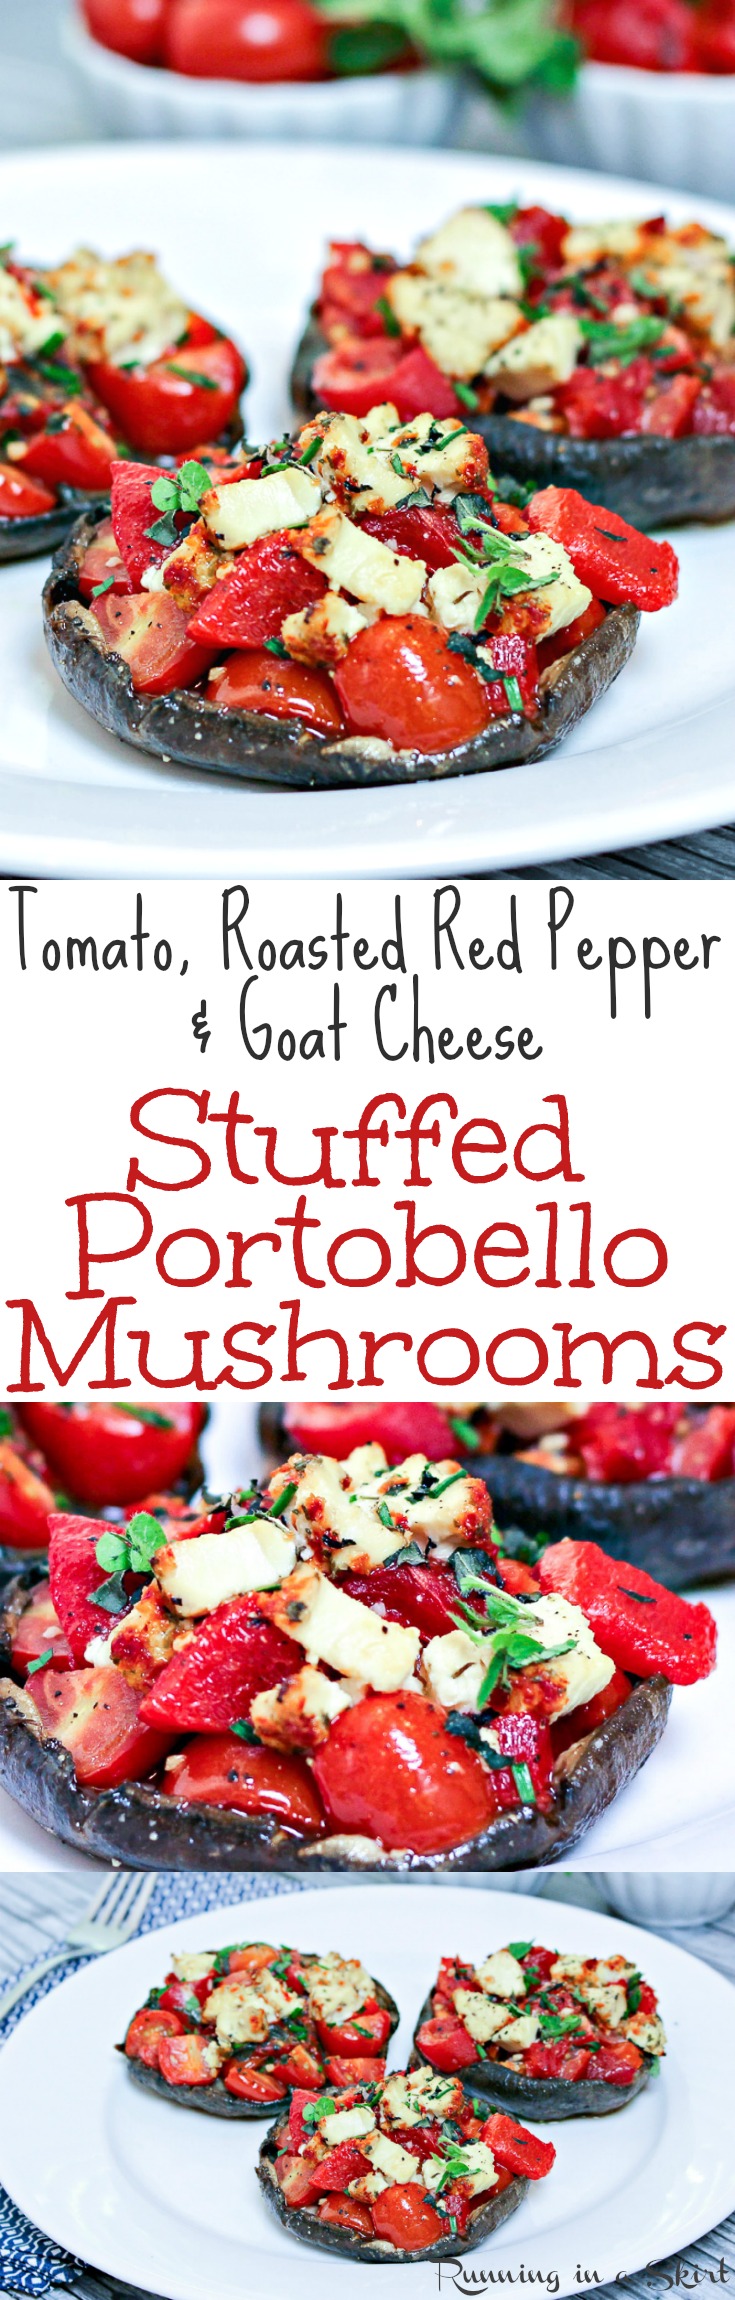 Healthy Vegetarian Stuffed Portobello Mushrooms recipe - with roasted tomato, roasted red peppers and goat cheese! Clean eating and a great option for a vegetarian main course. These caps are baked to perfection. Low Carb & Gluten free / Running in a Skirt via @juliewunder